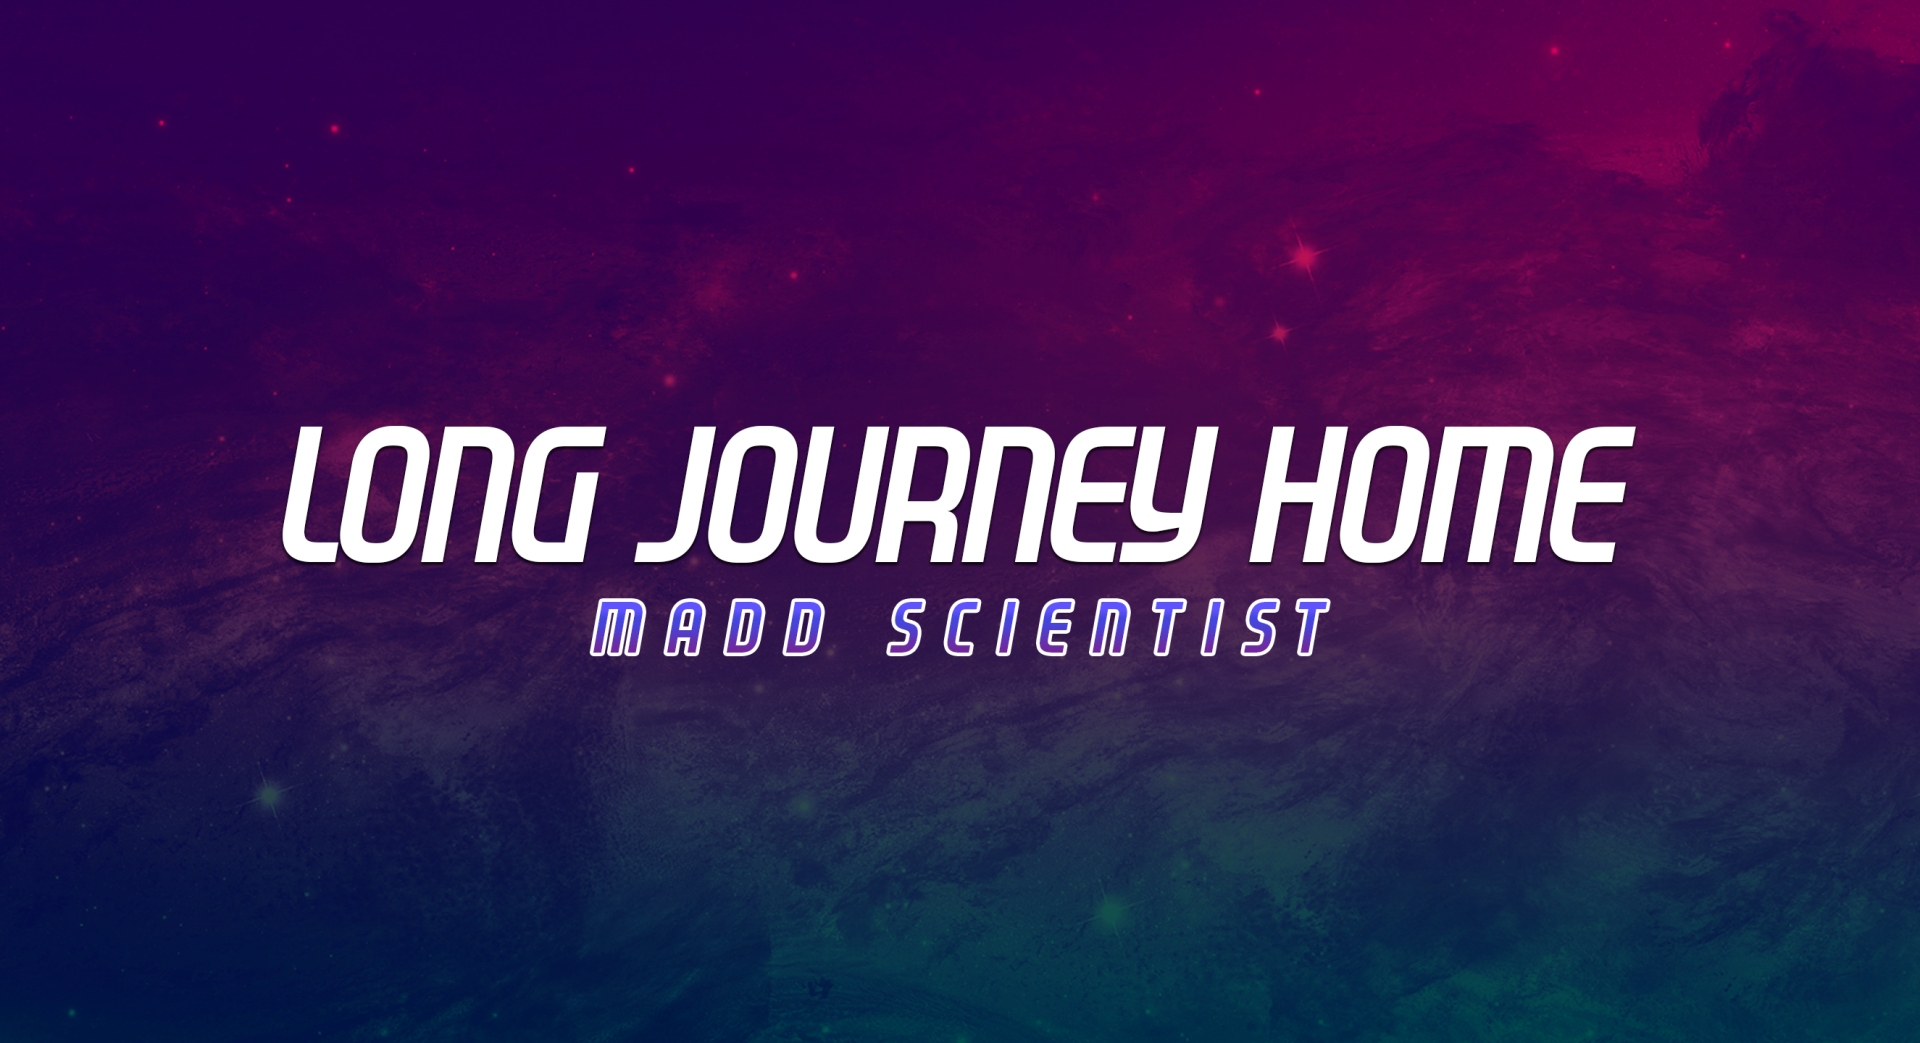 Madd Scientist - "Home to You" Music Video